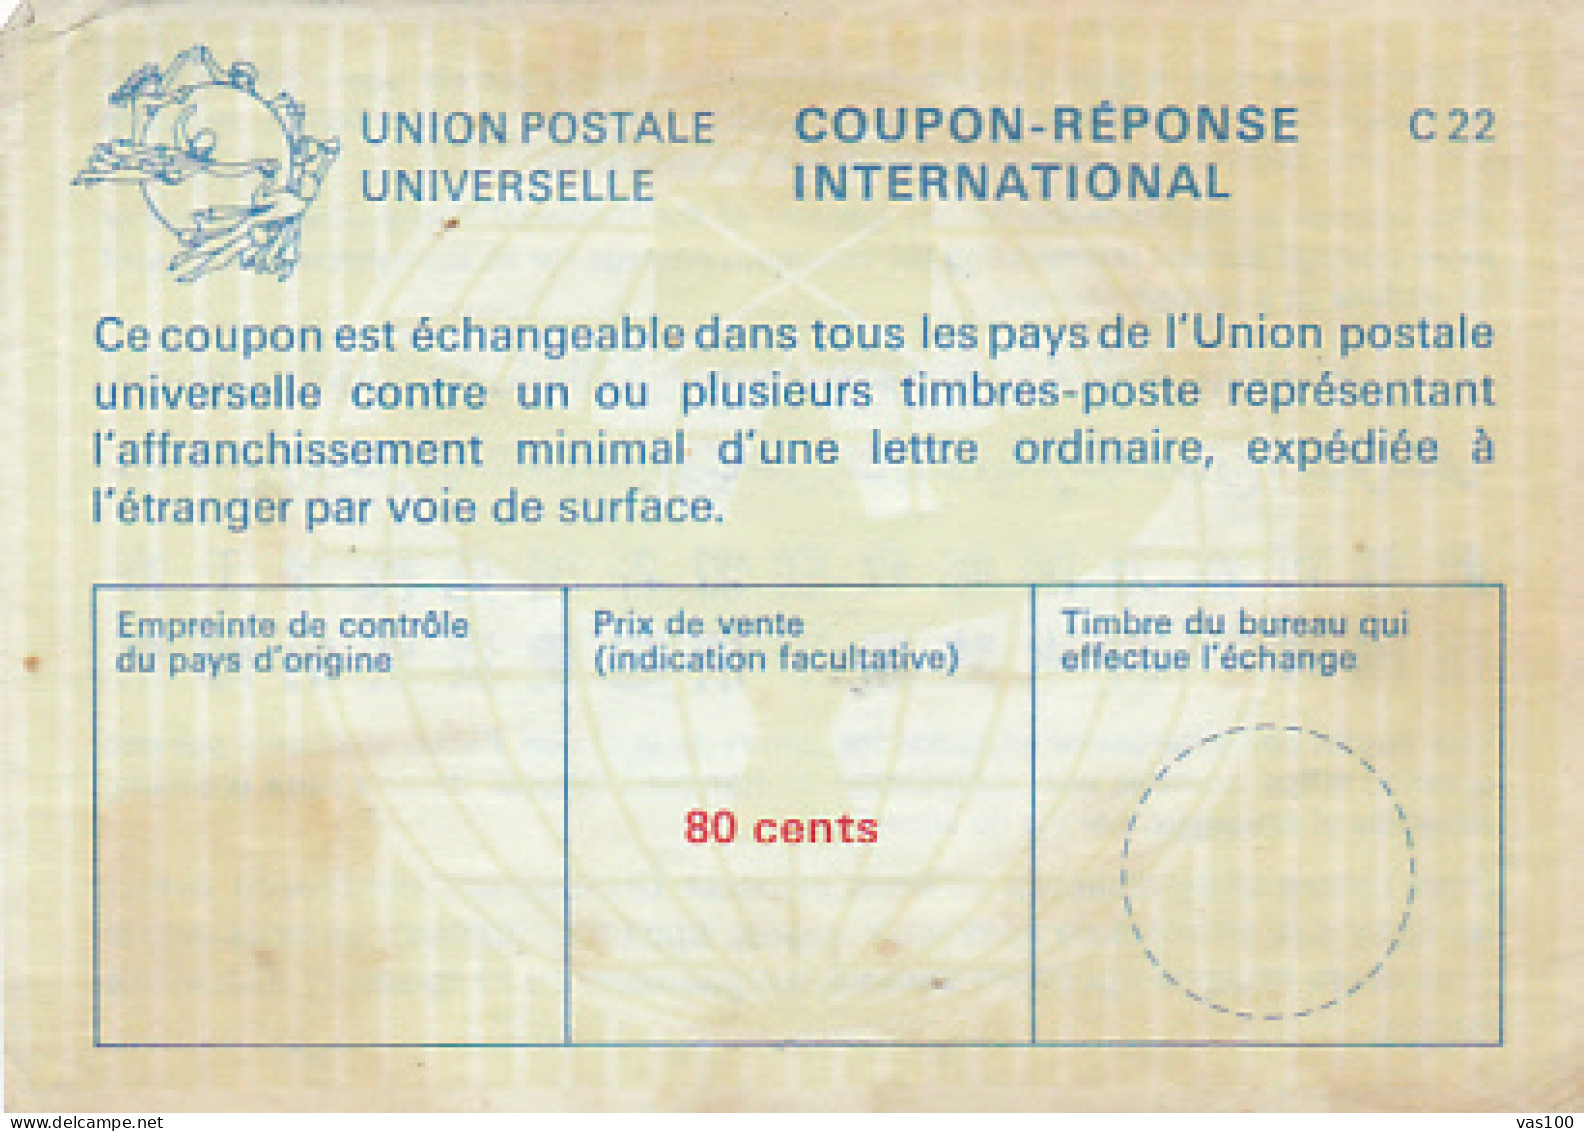 REPLY COUPONS, UPU, 80 CENTS, UNUSED, FRANCE - Coupons-réponse